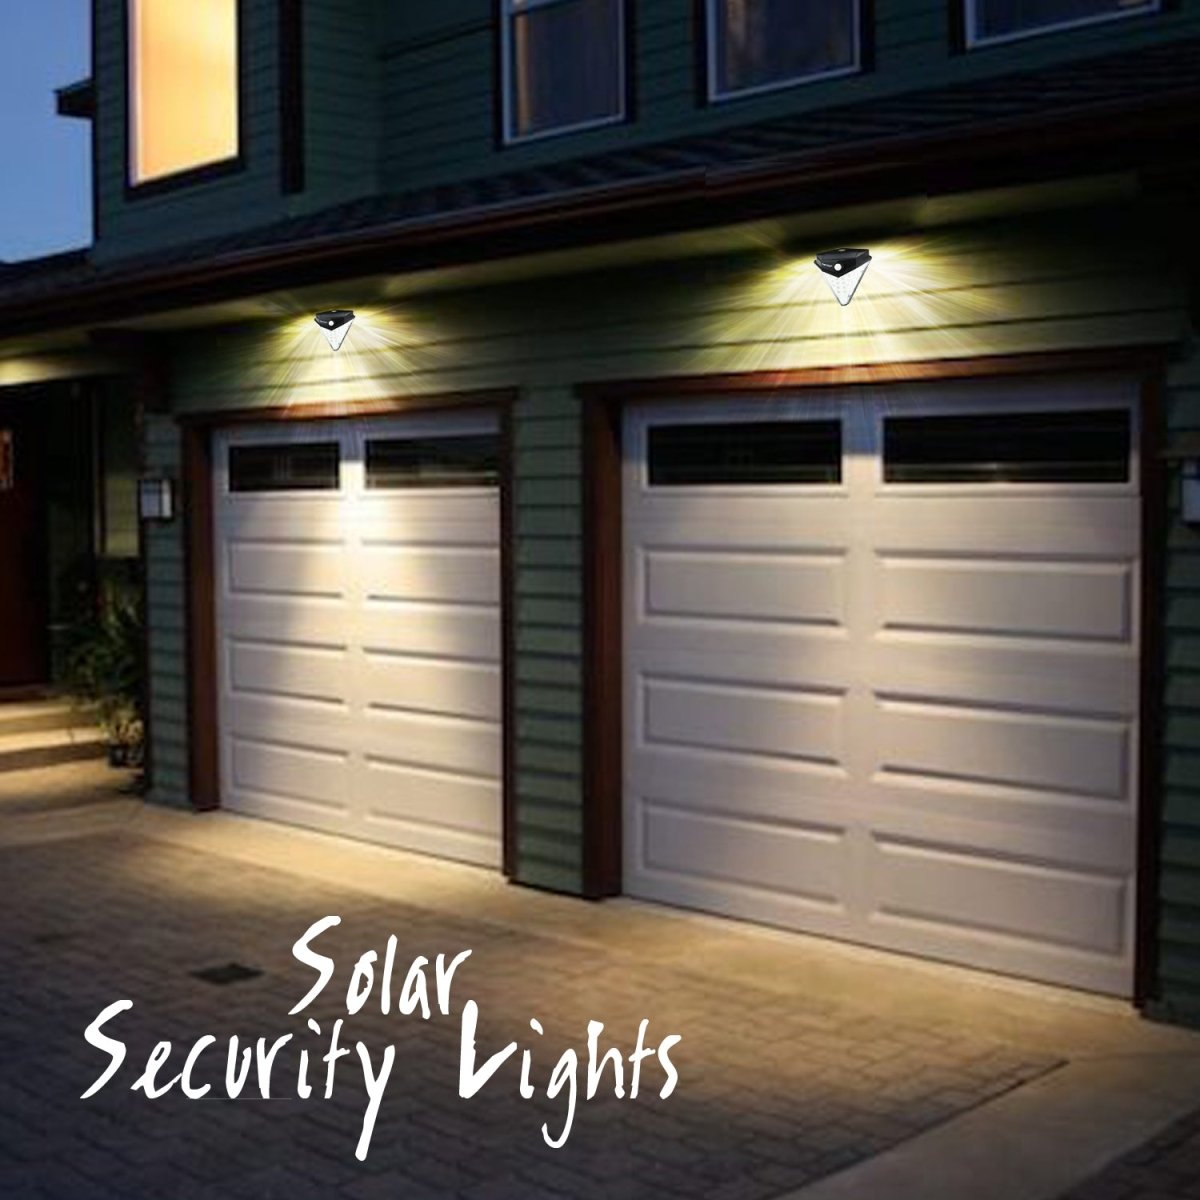 Ways to Secure Your Home and Assets with Simple Lightings | Hardoll Enterprises - Hardoll